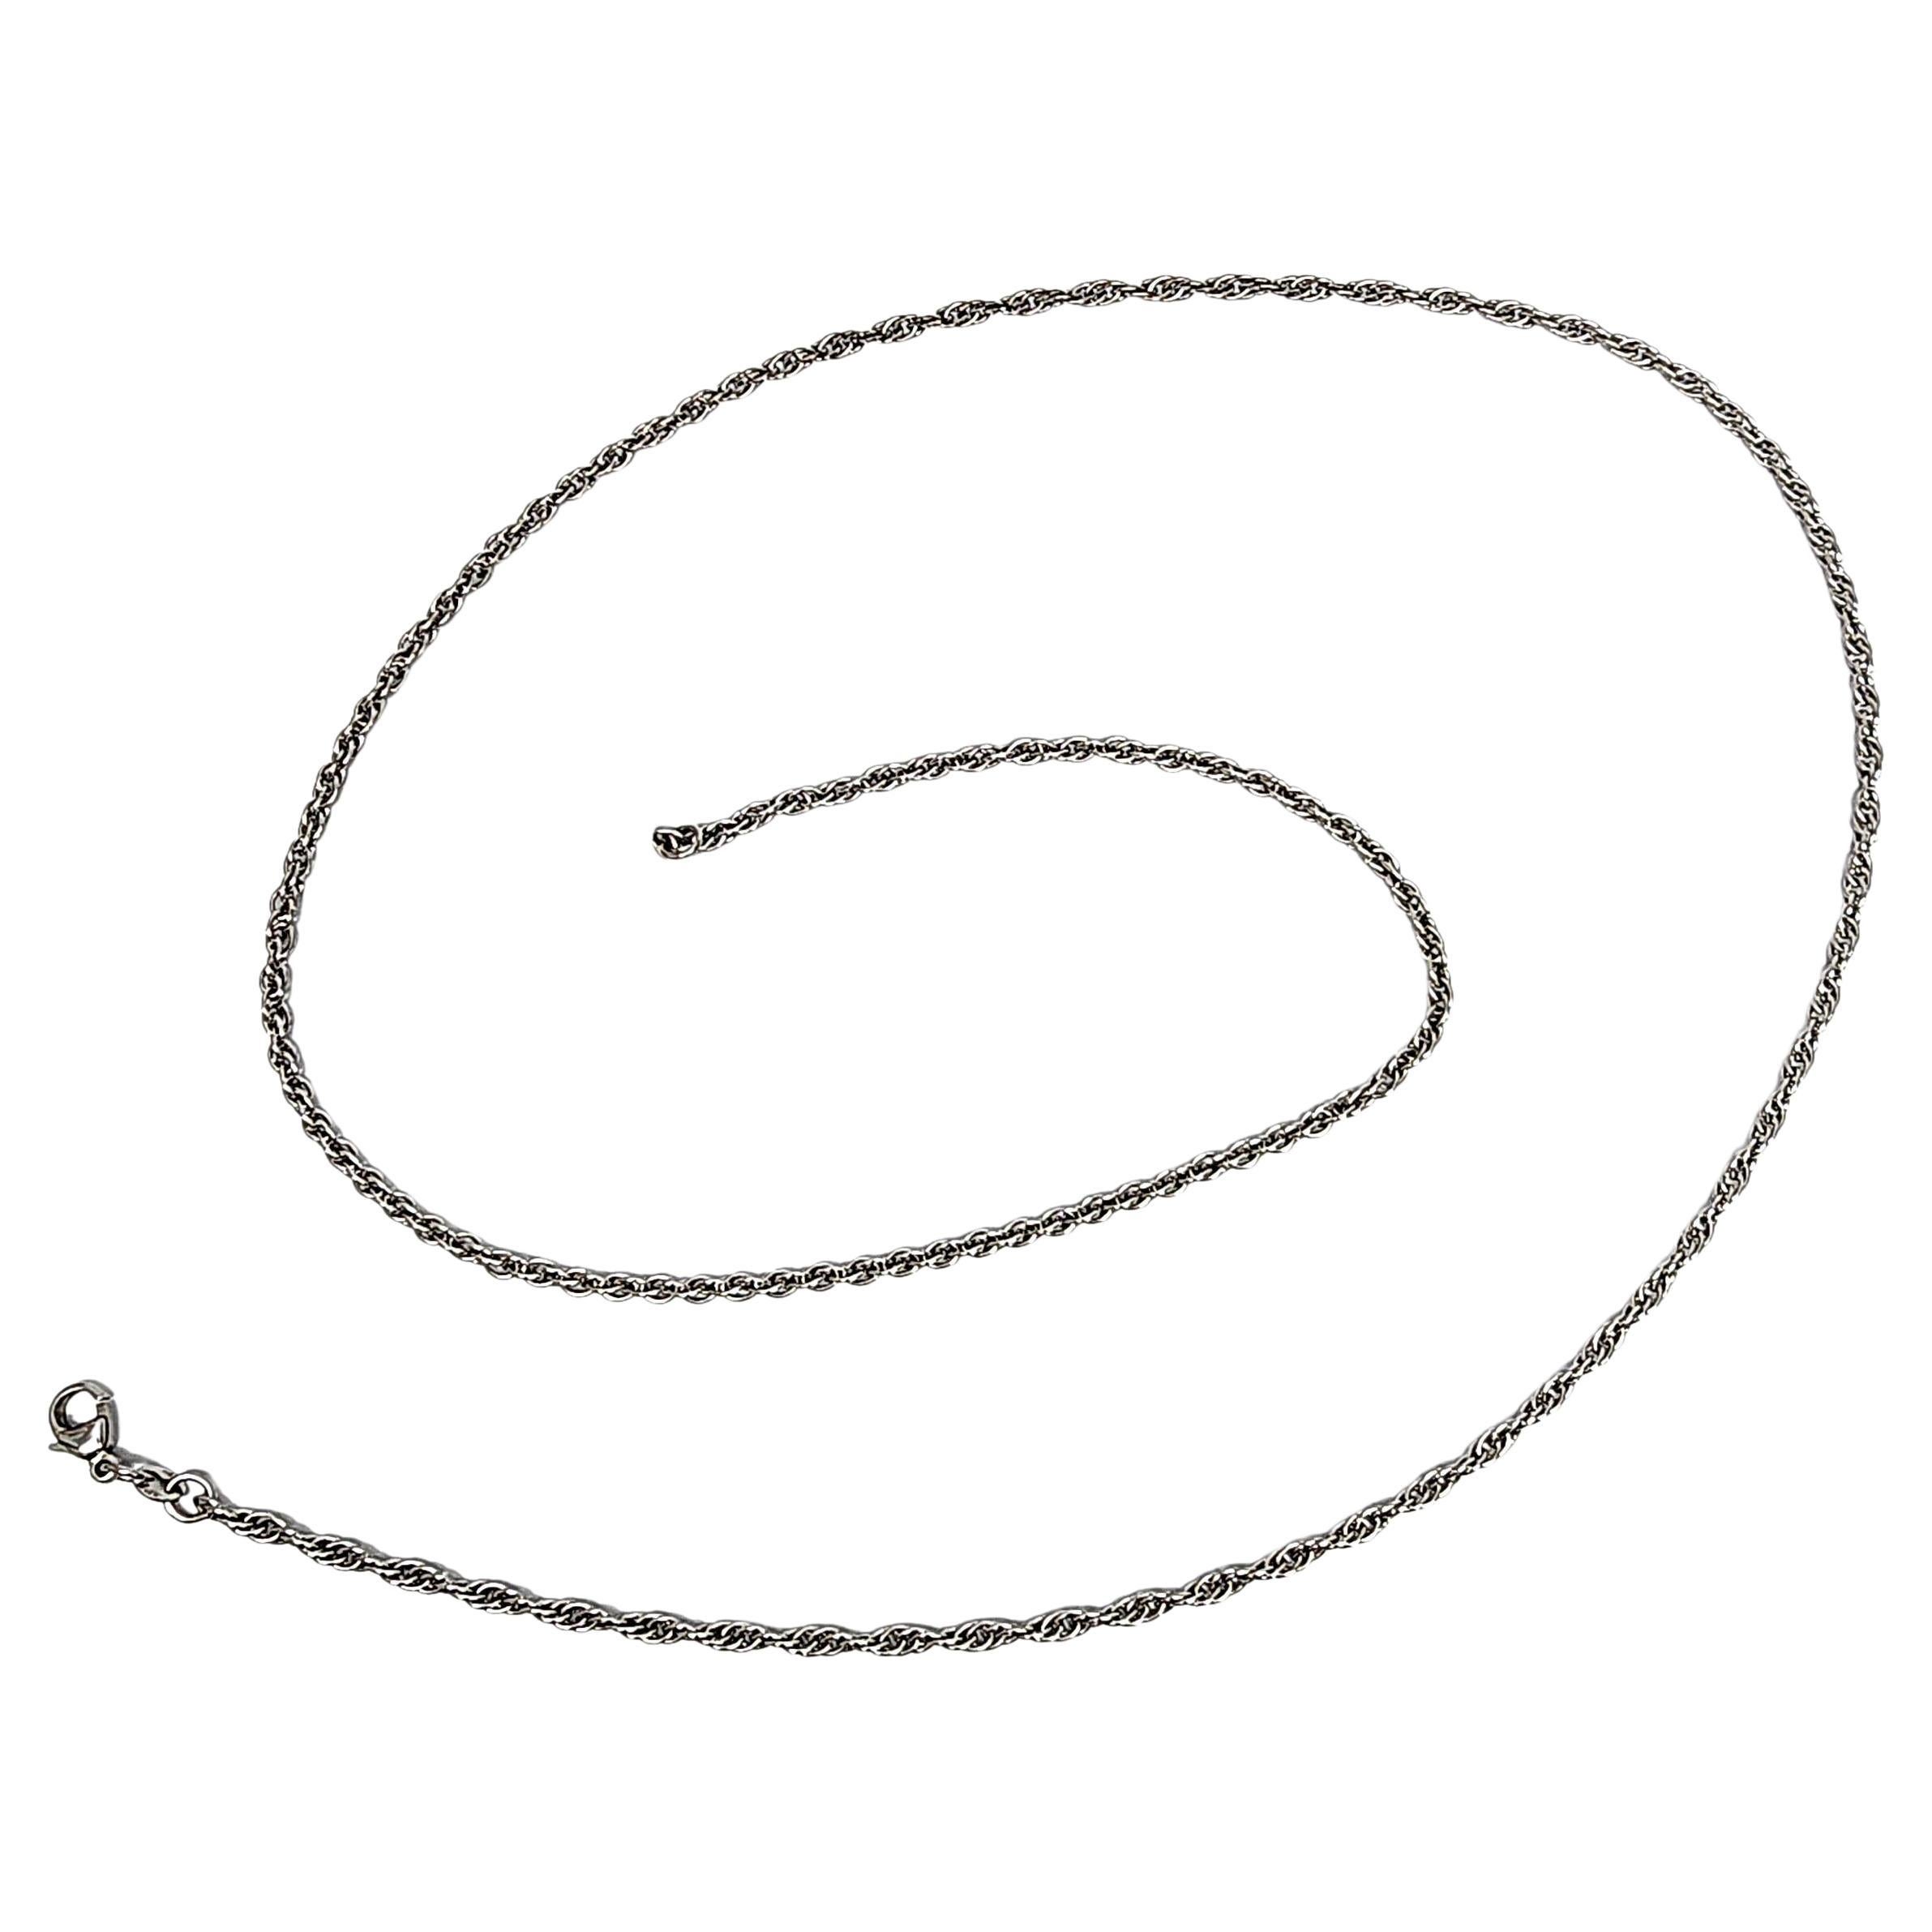 James Avery Sterling Silver Twist Chain Necklace #16610 For Sale